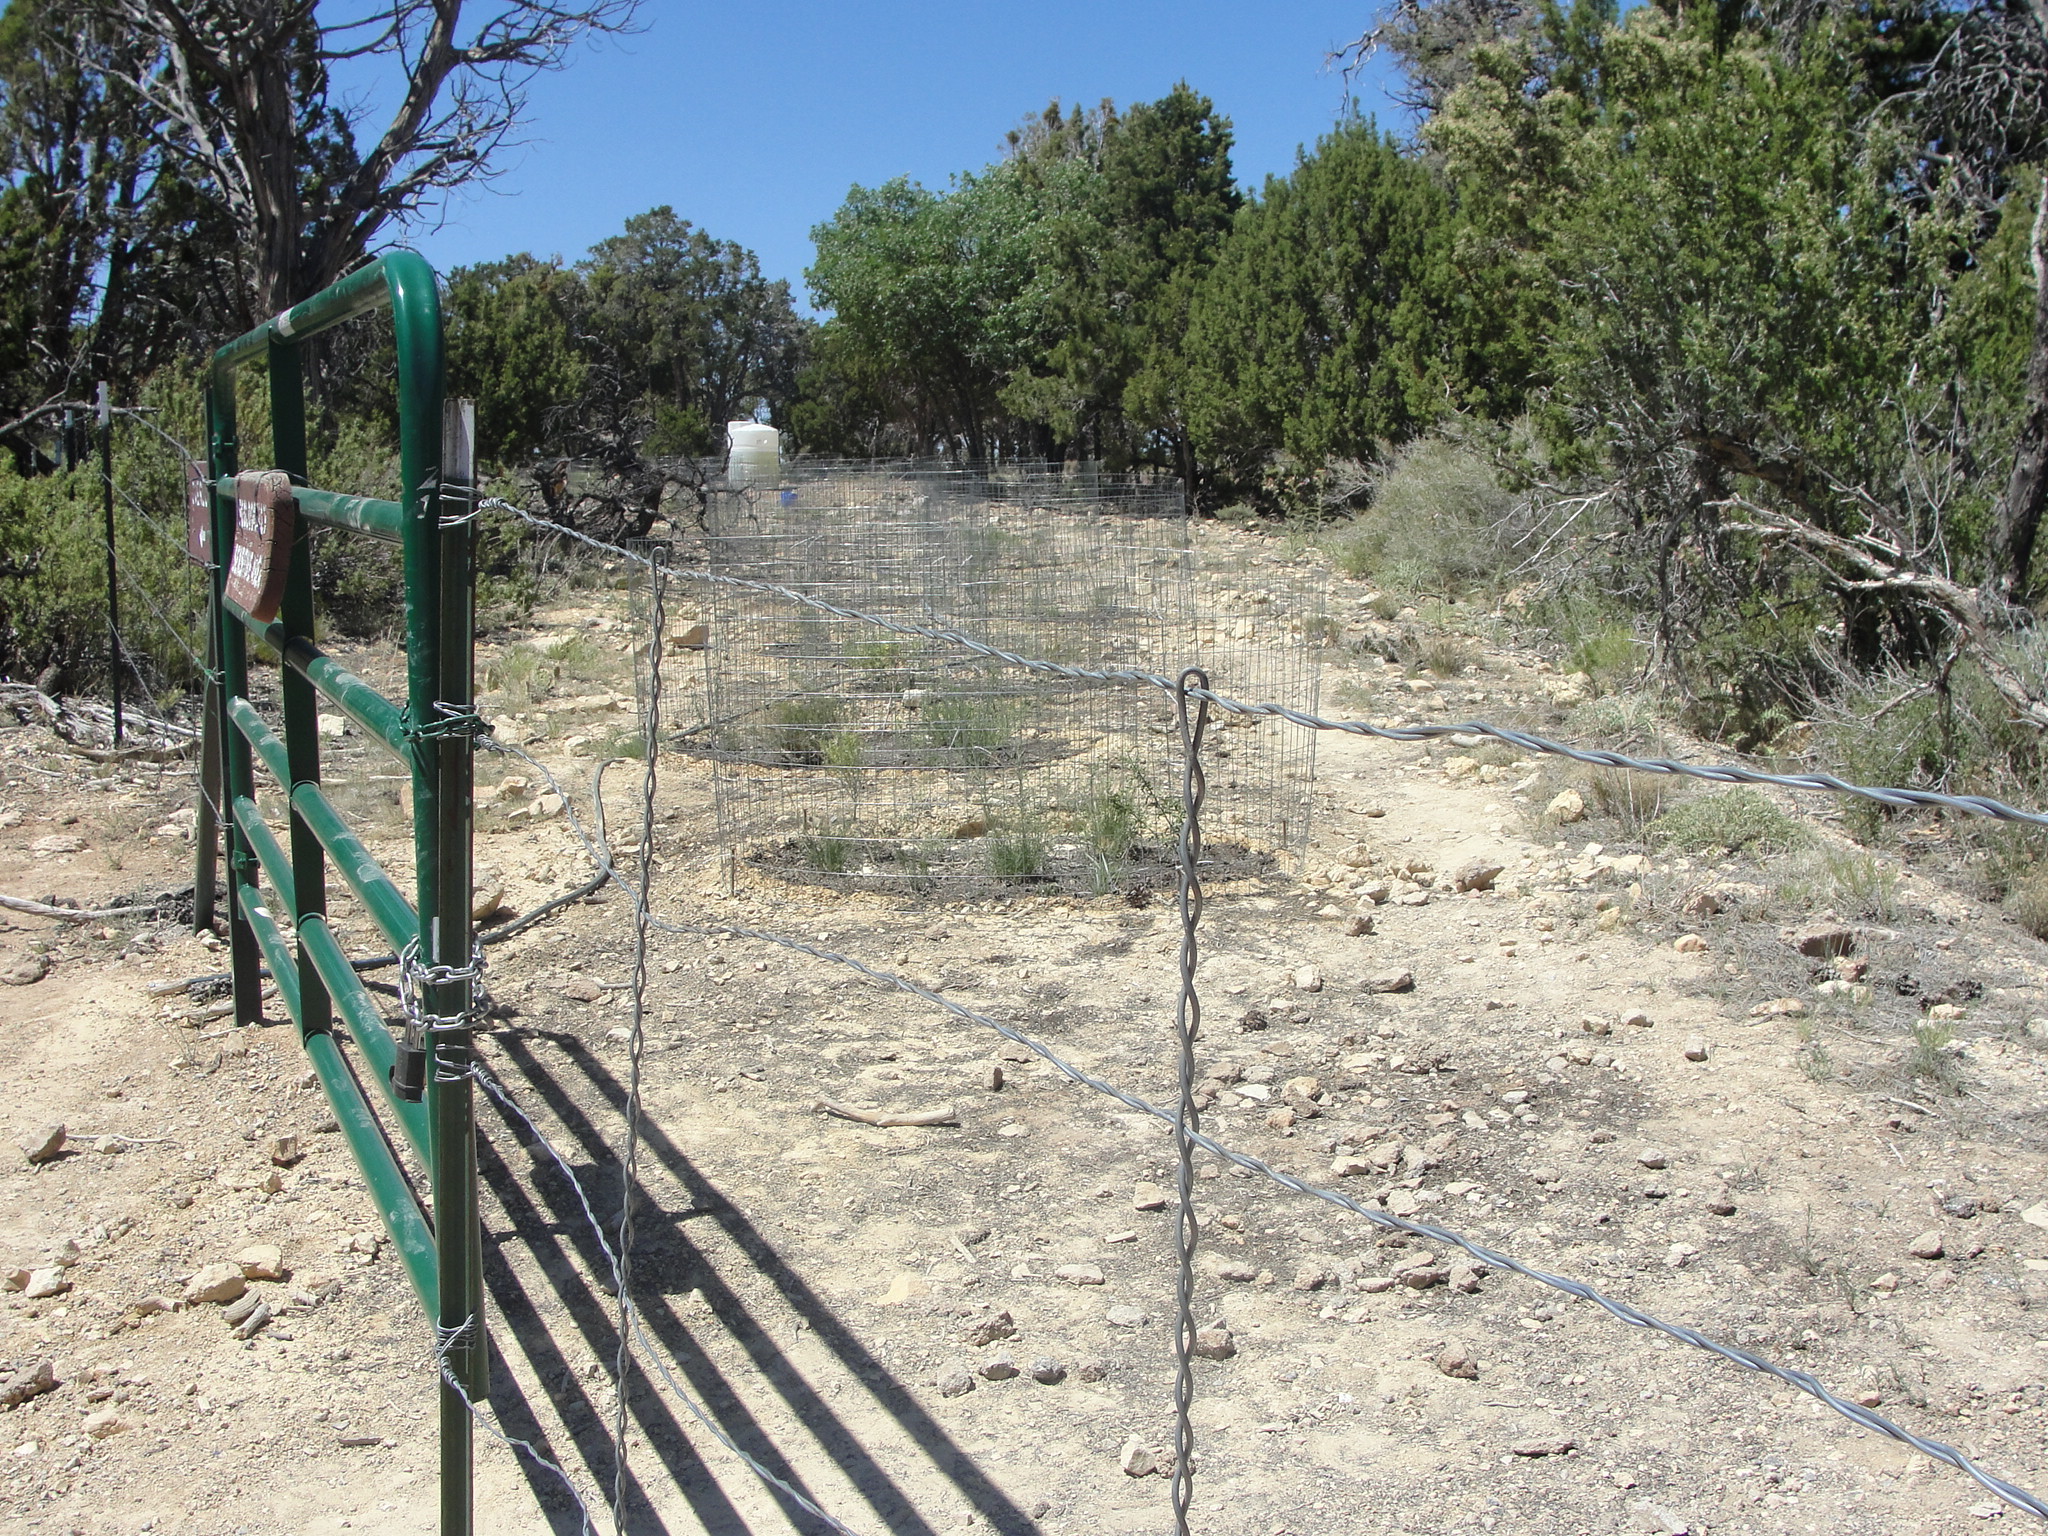  Picture of native plants being restored along a wire fence on the road to the Orphan mine. 